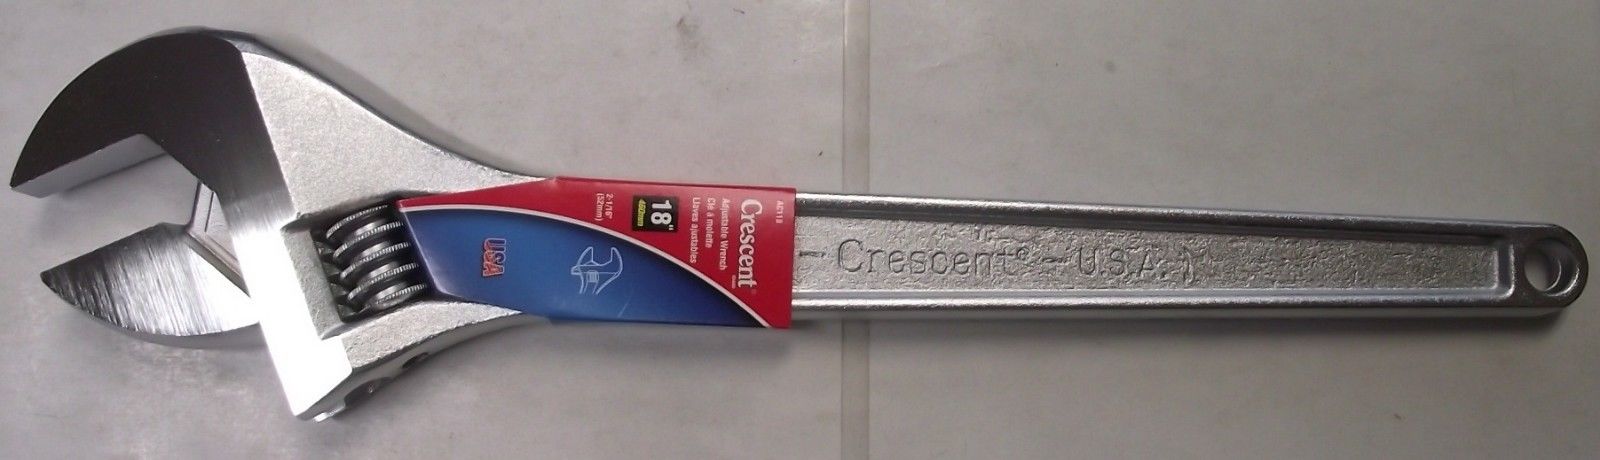 CRESCENT AC118 18" Adjustable Wrench USA